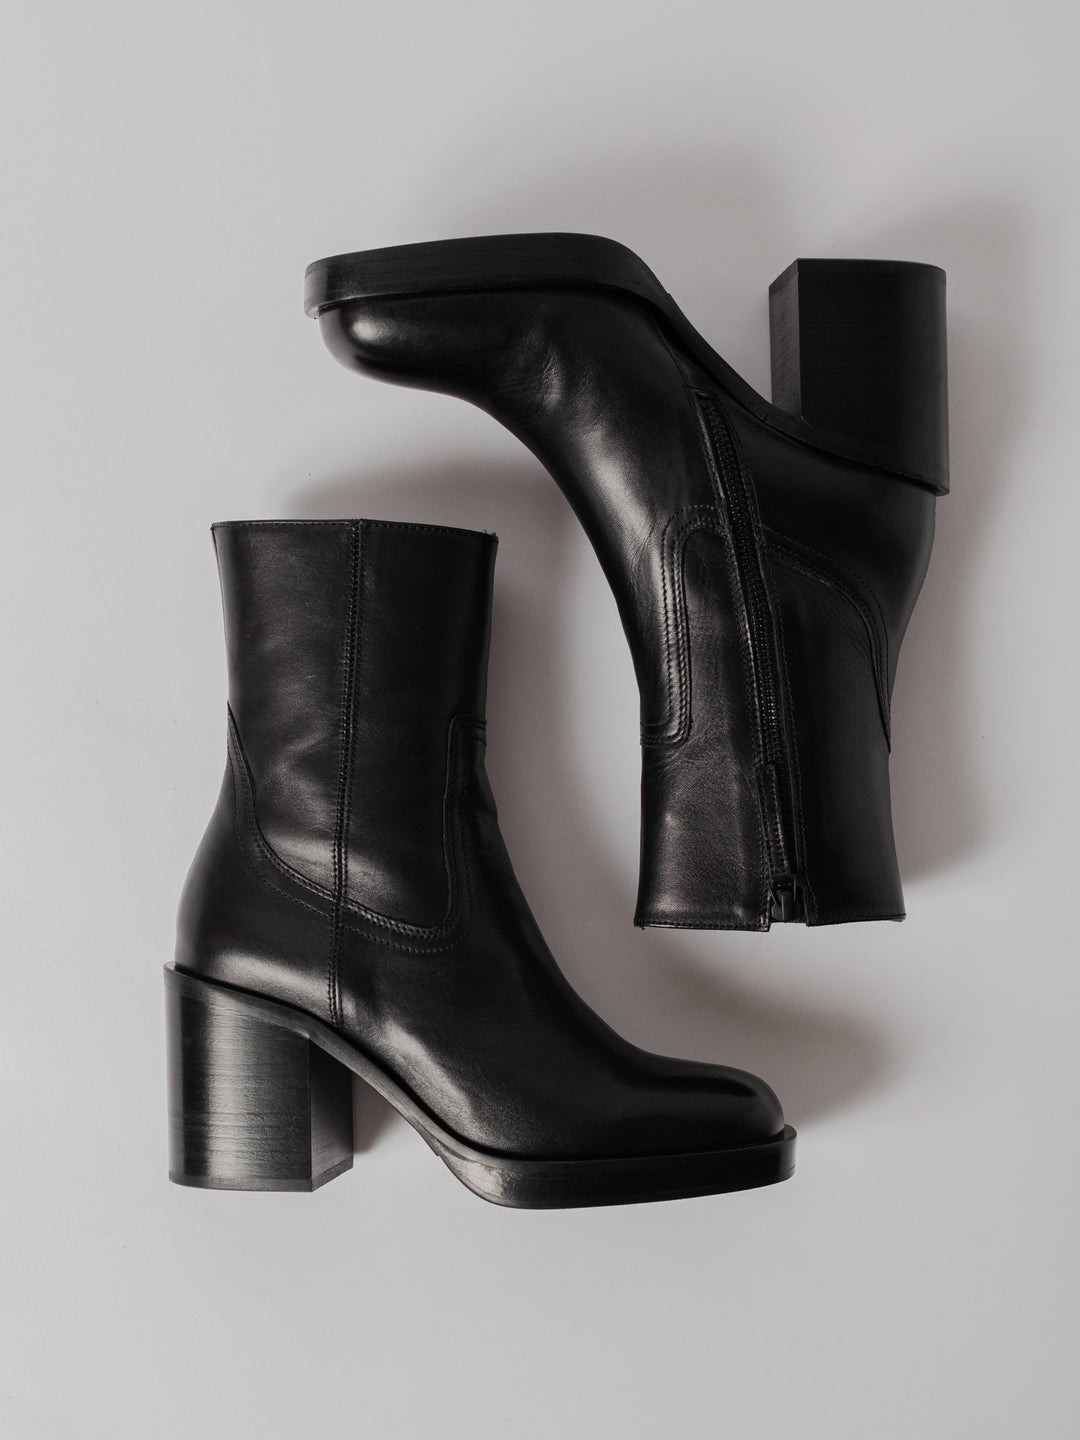 Blankens The Milou black leather boot, chrome-free. Made in Europe. elegant heel, contemporary shape, slightly elevated platform.